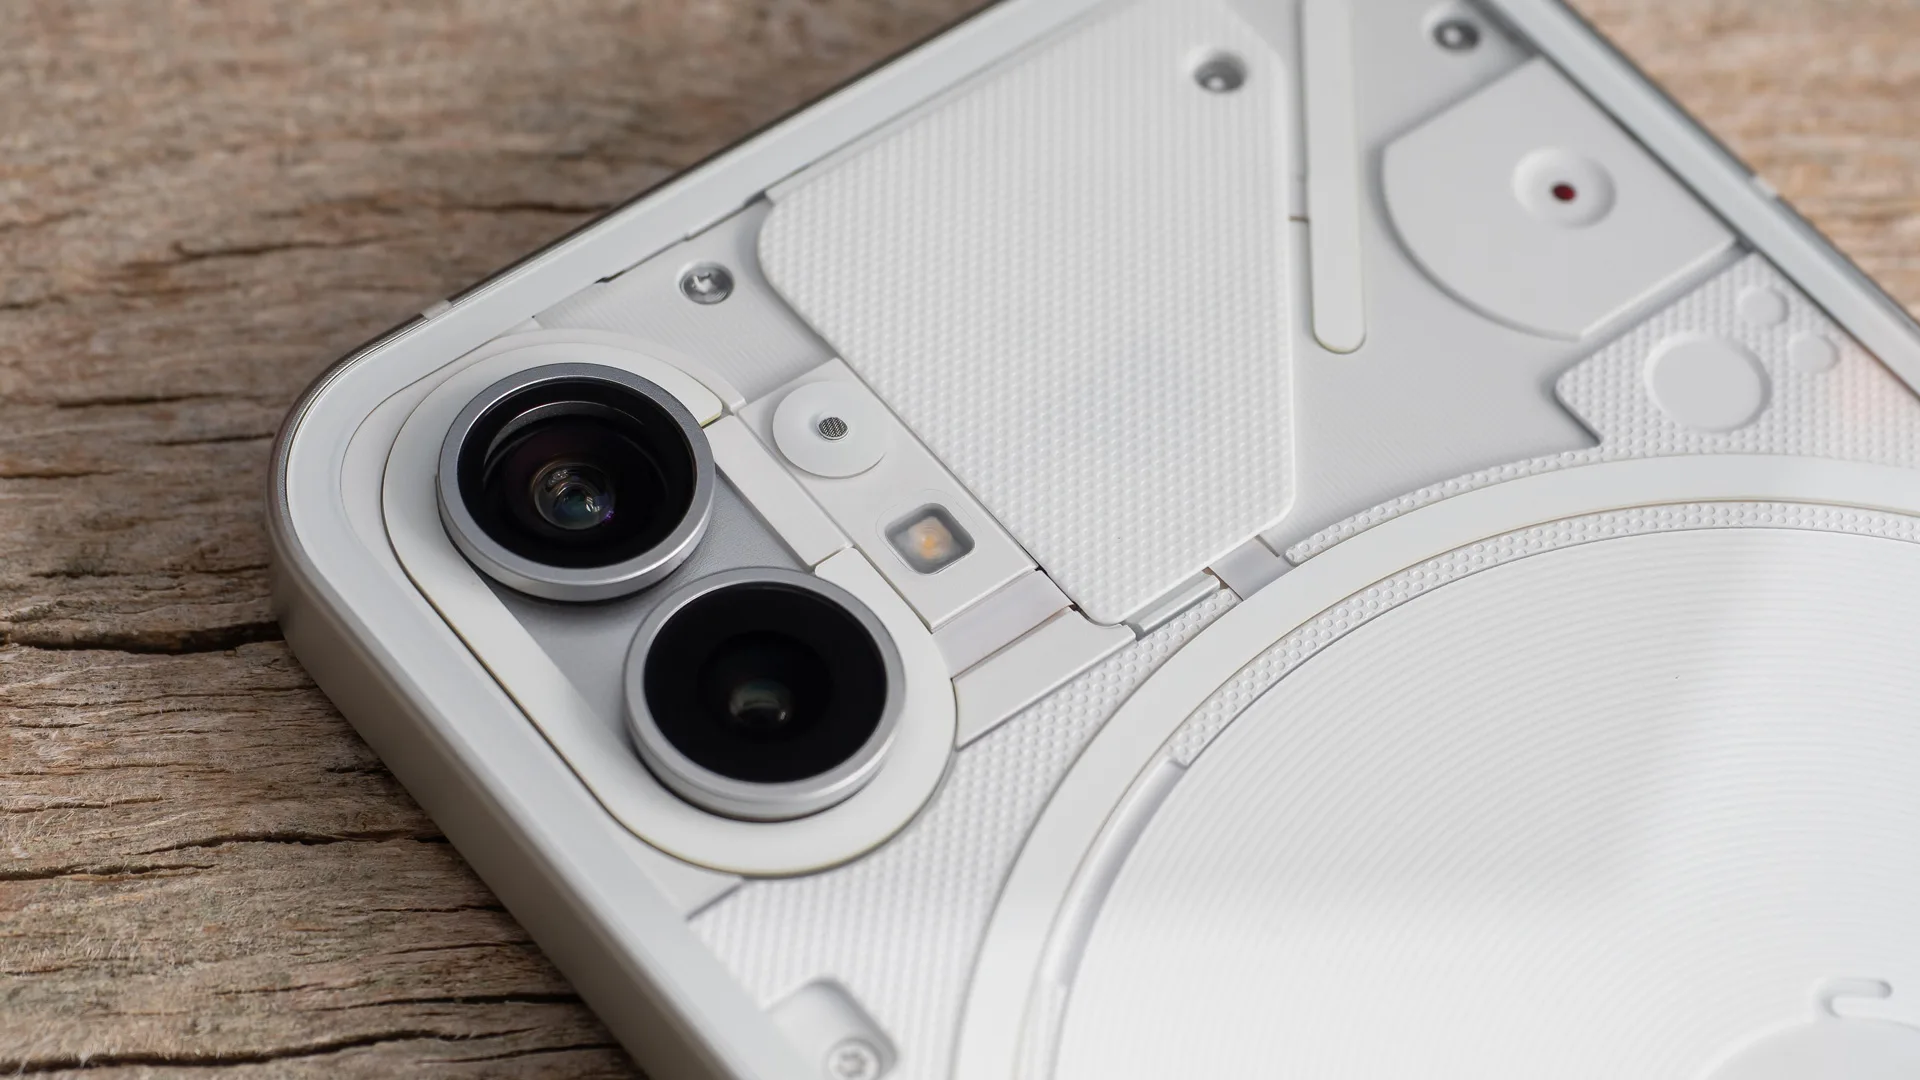 A photo of a Nothing phone up close showing it's futuristic white design with two camera lenses